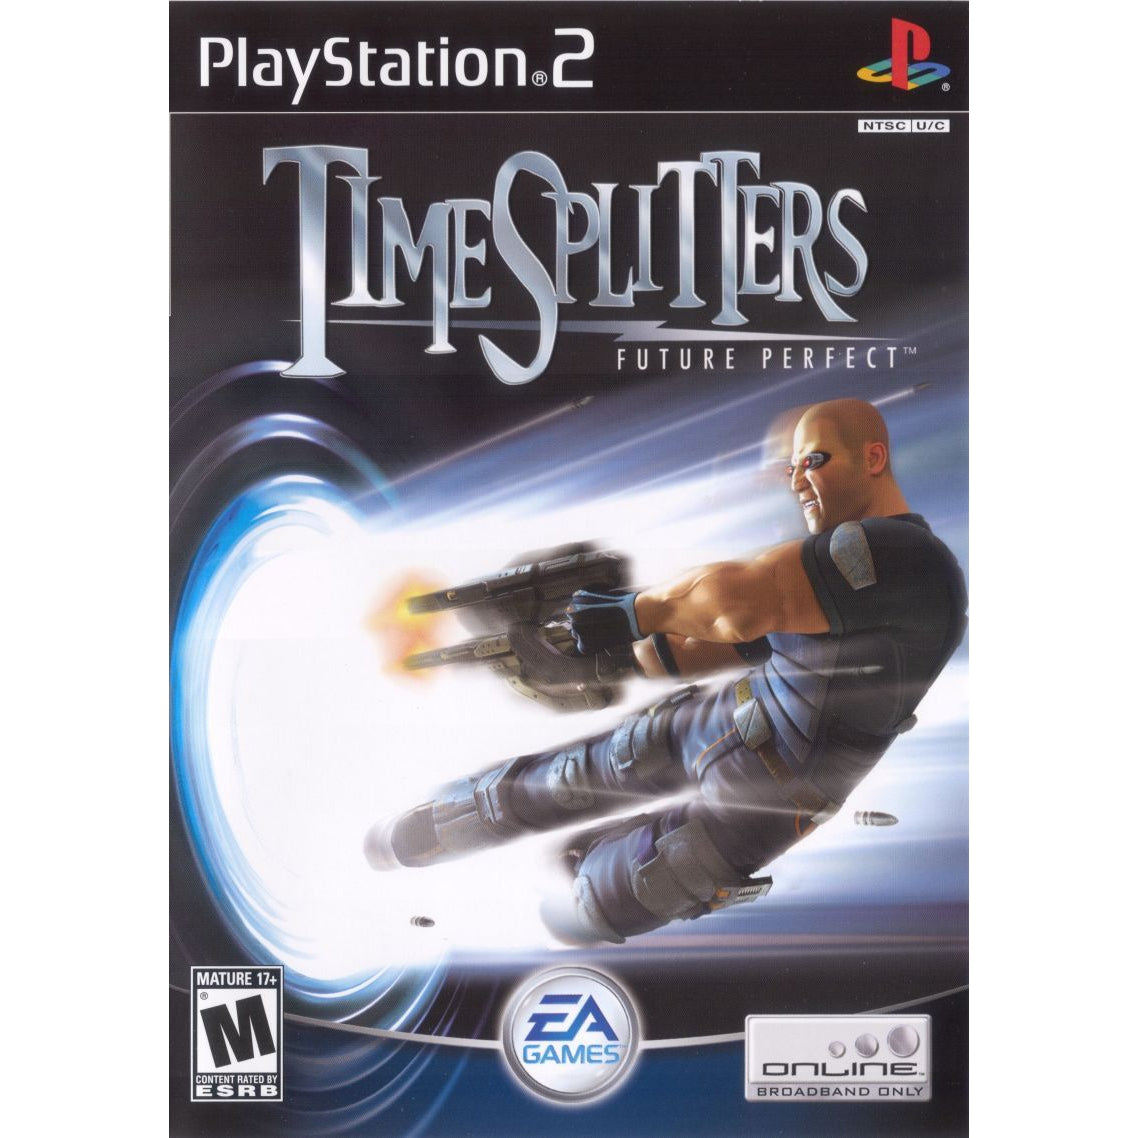 TimeSplitters: Future Perfect - PlayStation 2 (PS2) Game Complete - YourGamingShop.com - Buy, Sell, Trade Video Games Online. 120 Day Warranty. Satisfaction Guaranteed.